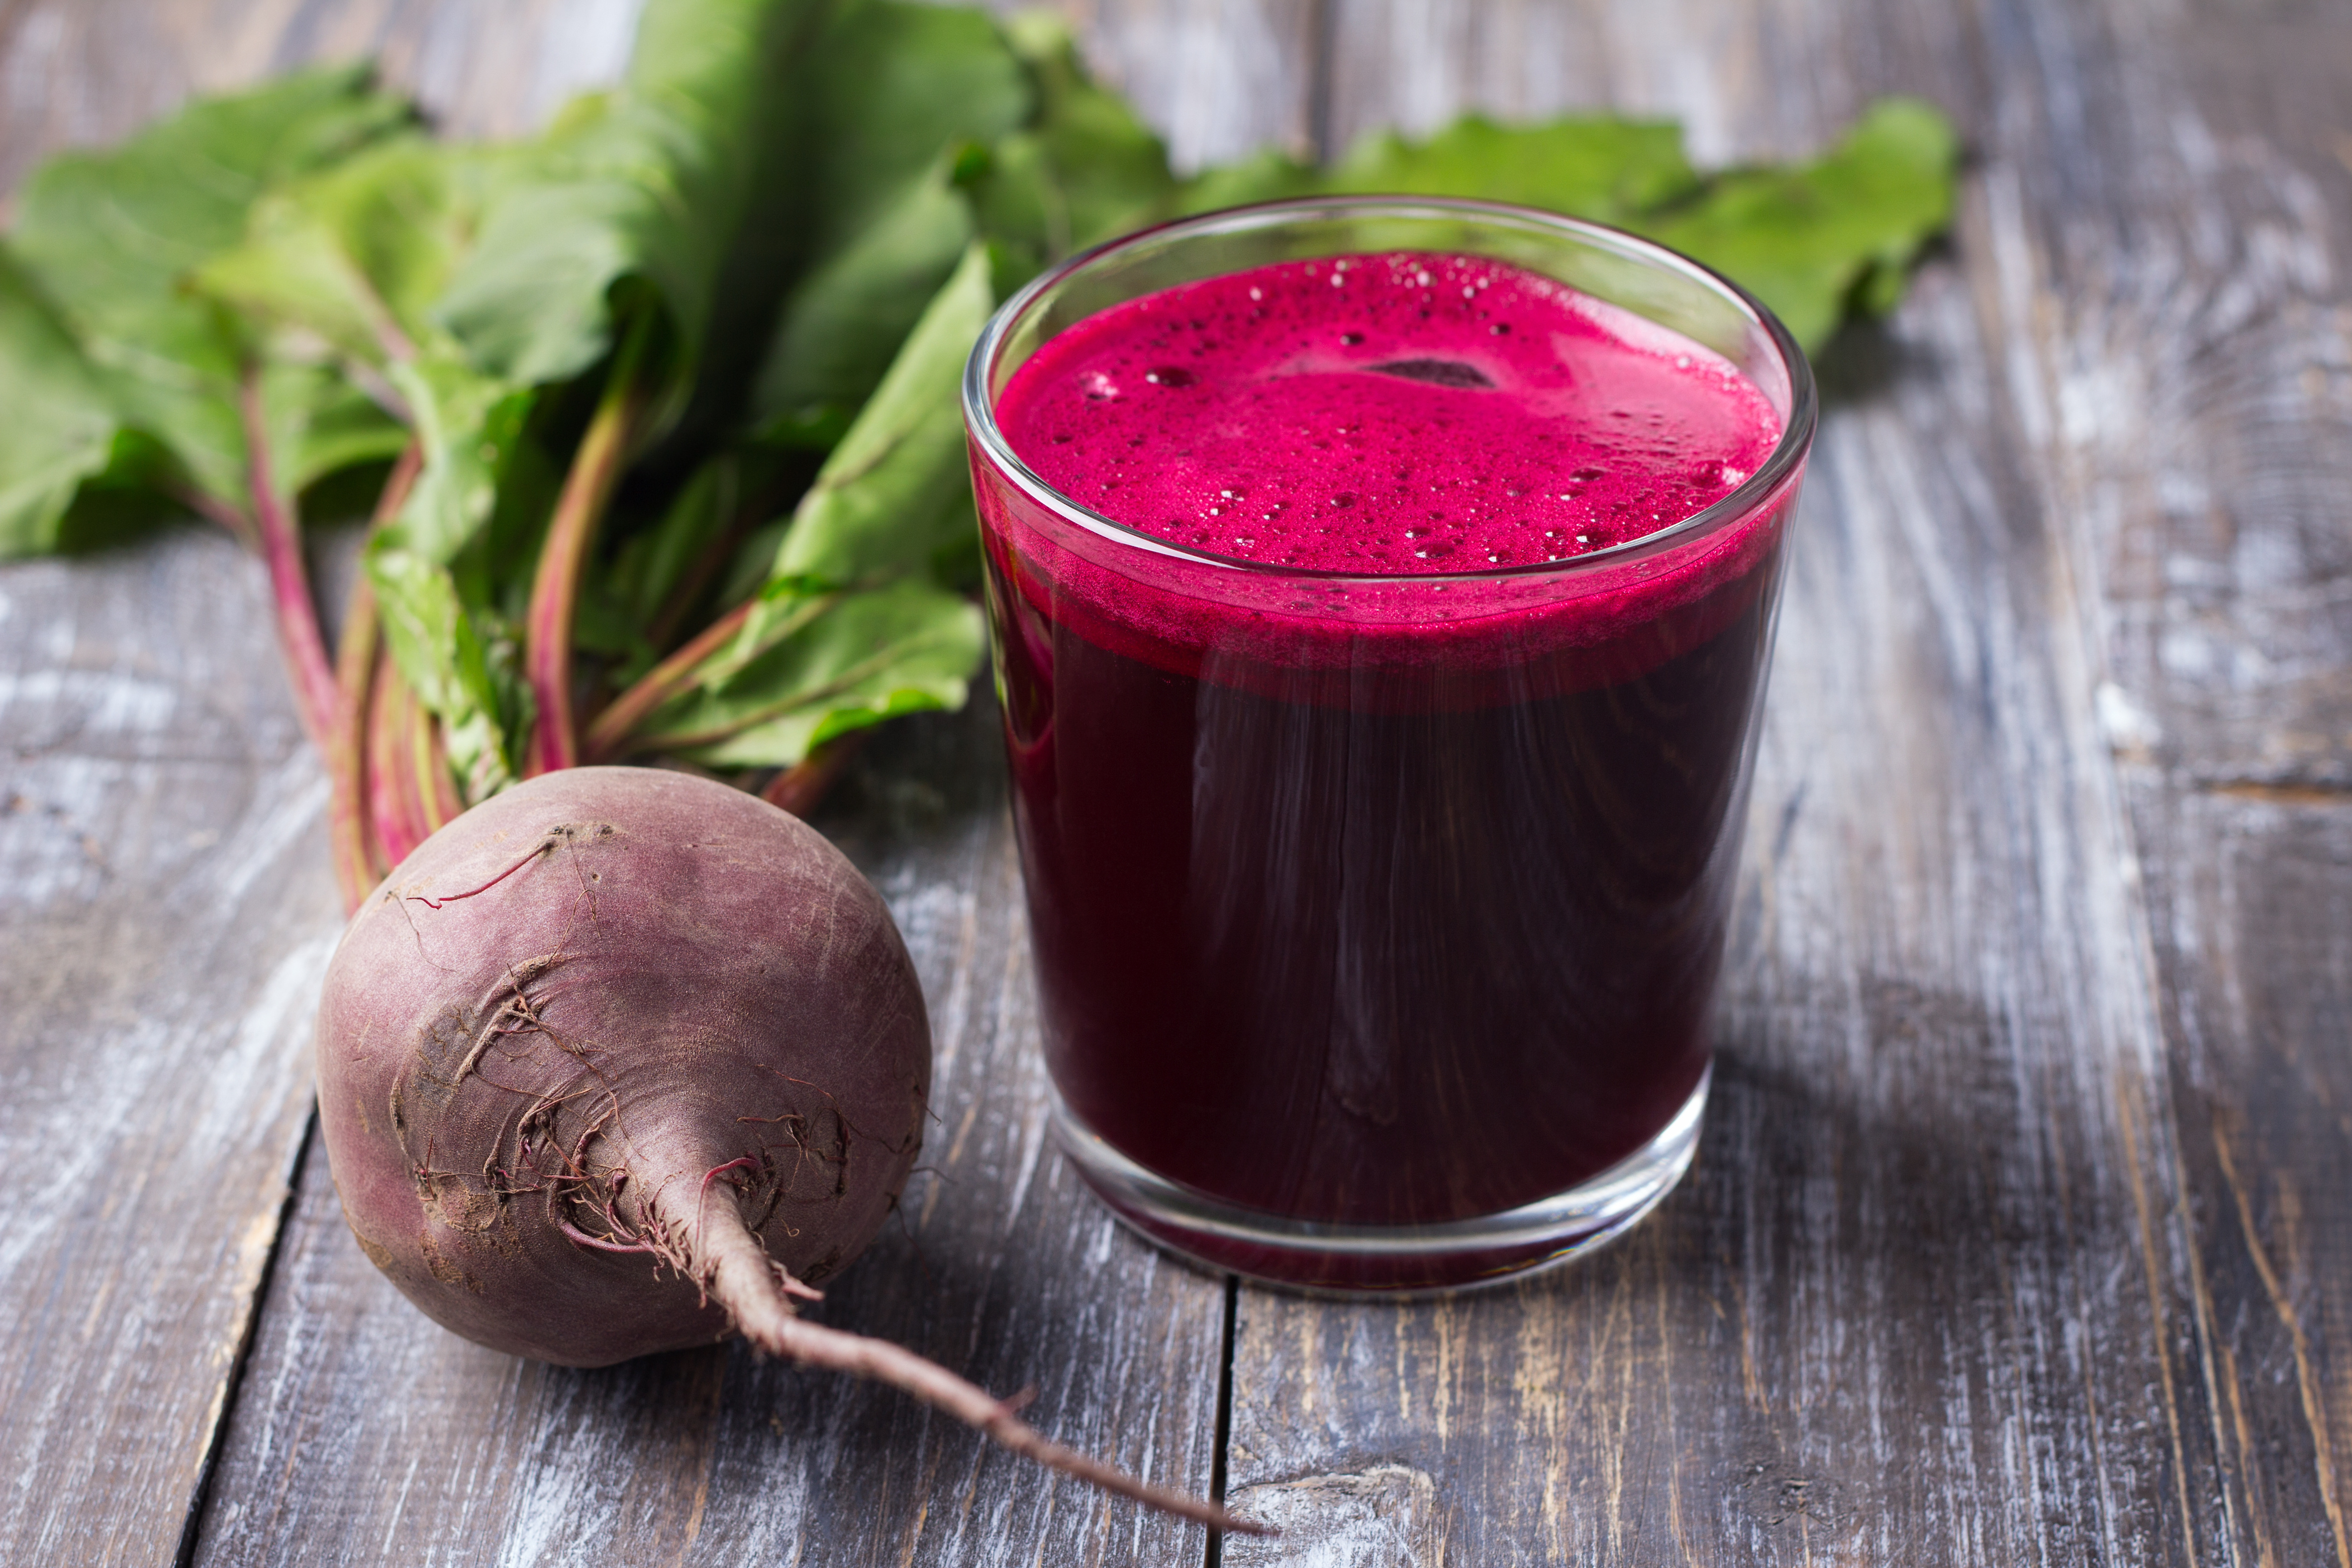 A cup of red beet juice with a beet laying on the wooden table next to it